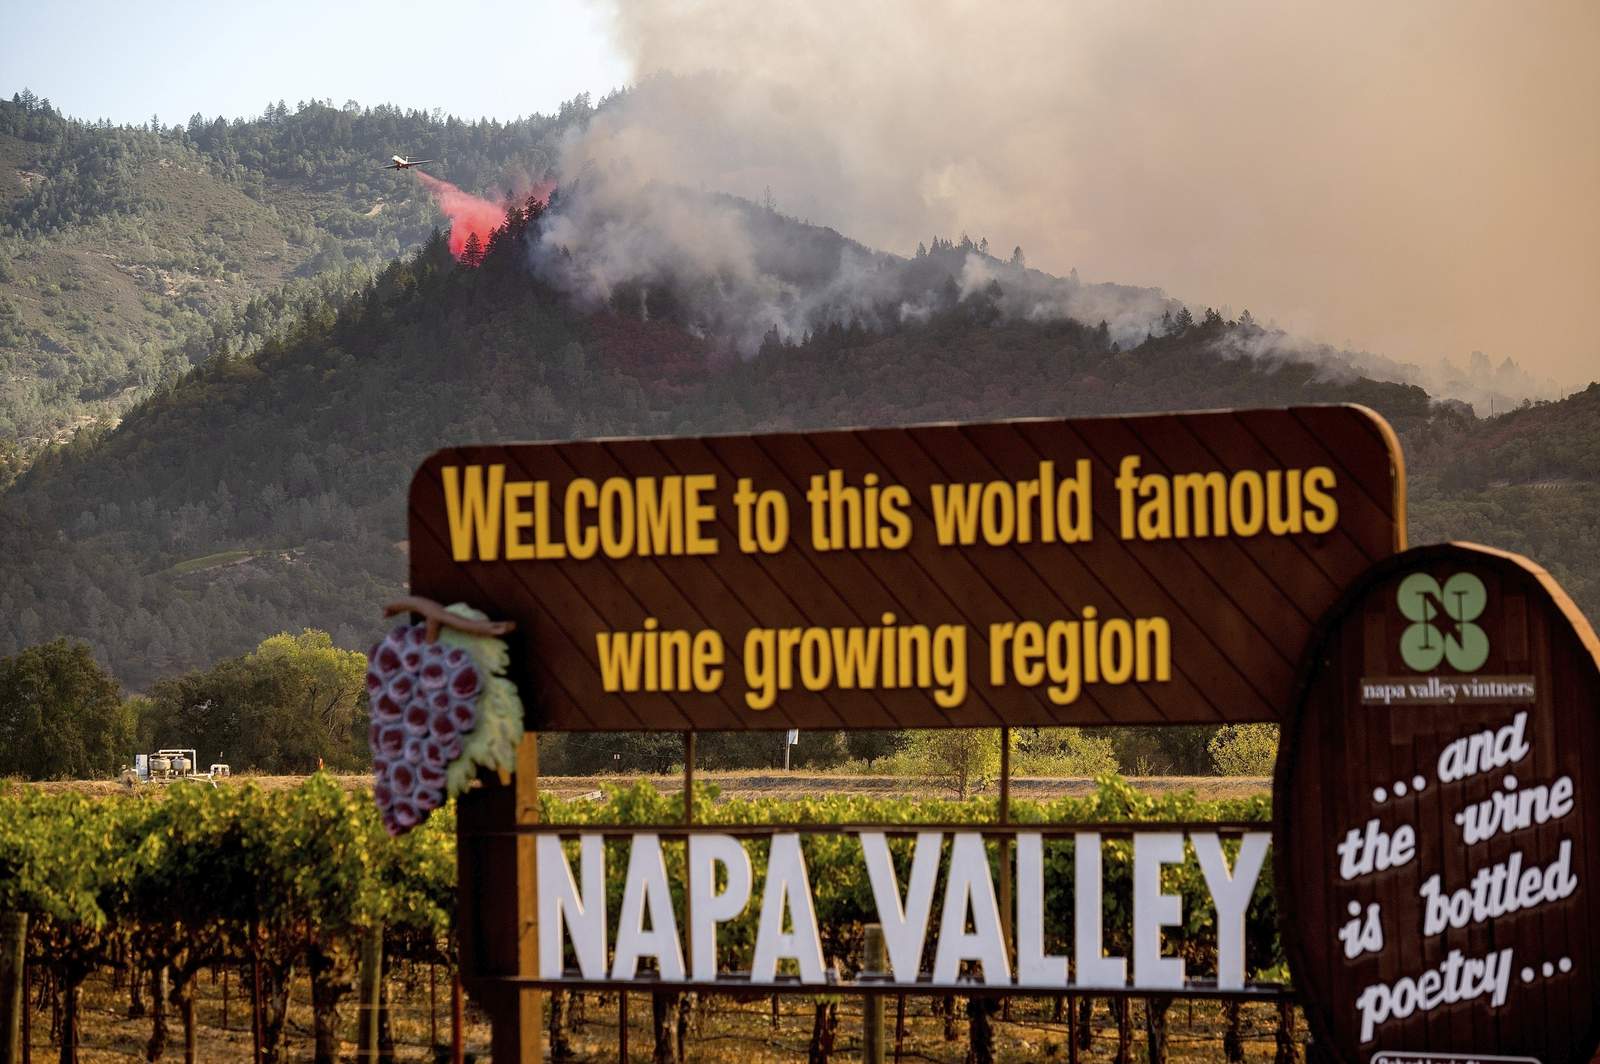 California wine country adapting to annual wildfire threat